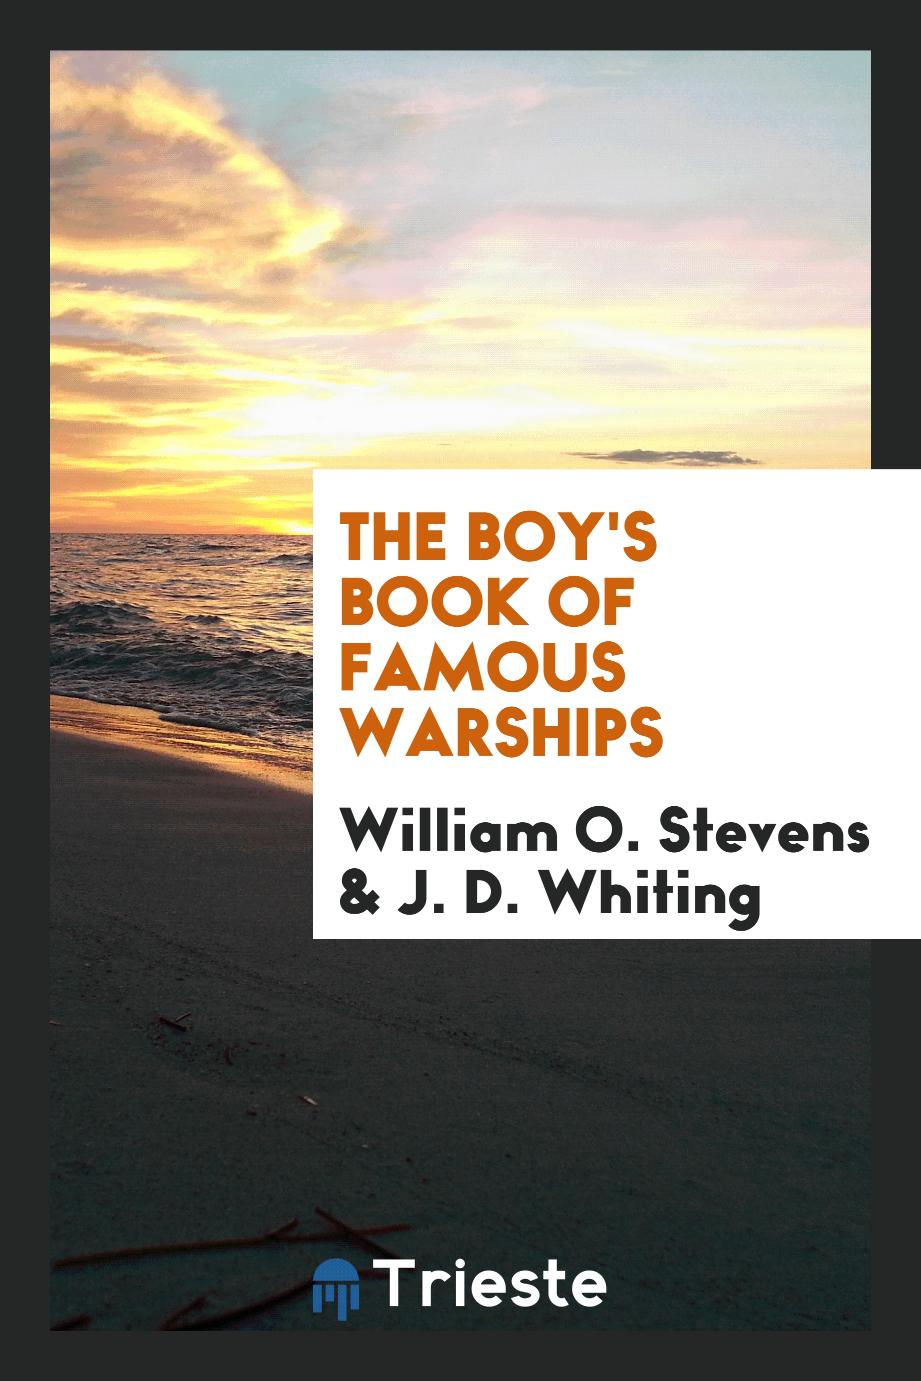 The Boy's Book of Famous Warships